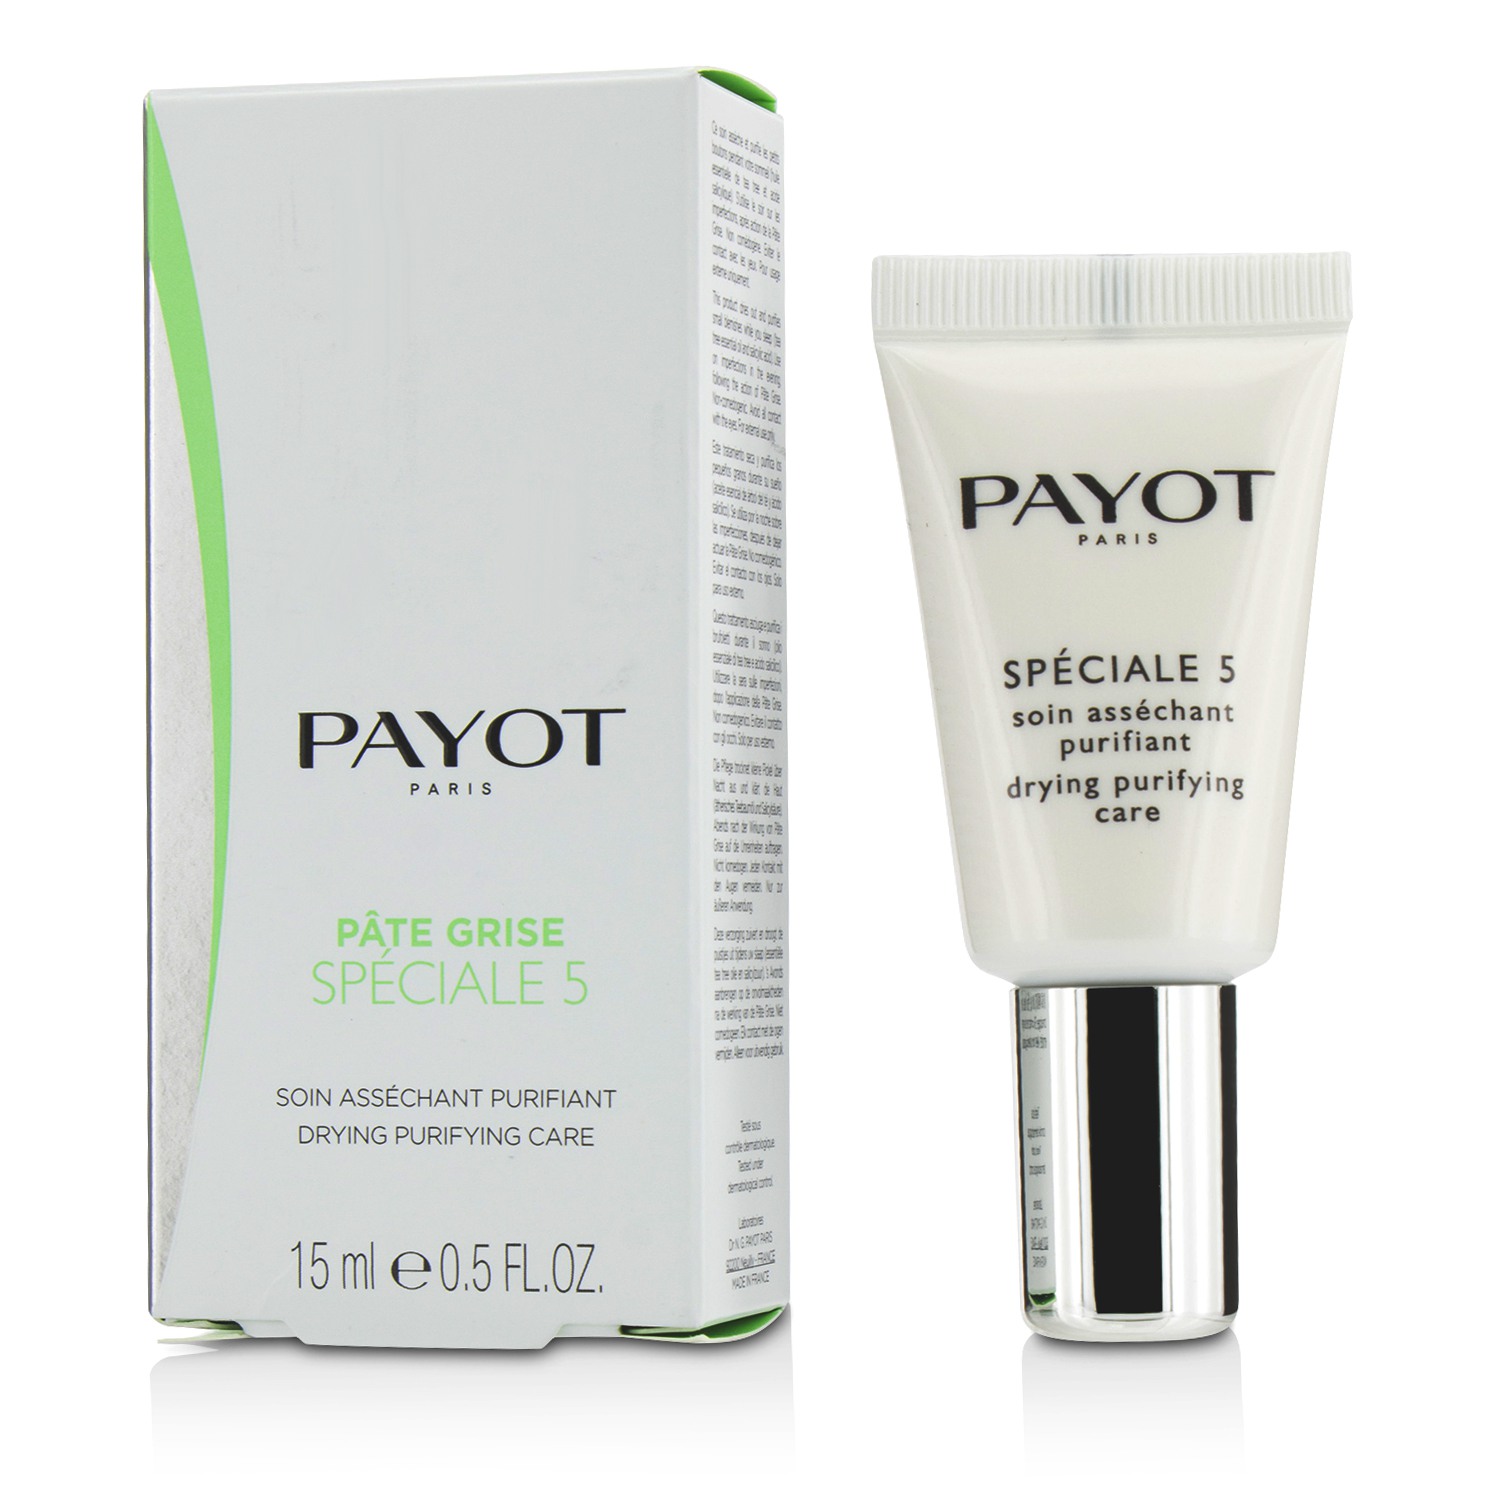 Pate Grise Speciale 5 Drying Purifying Care Payot Image